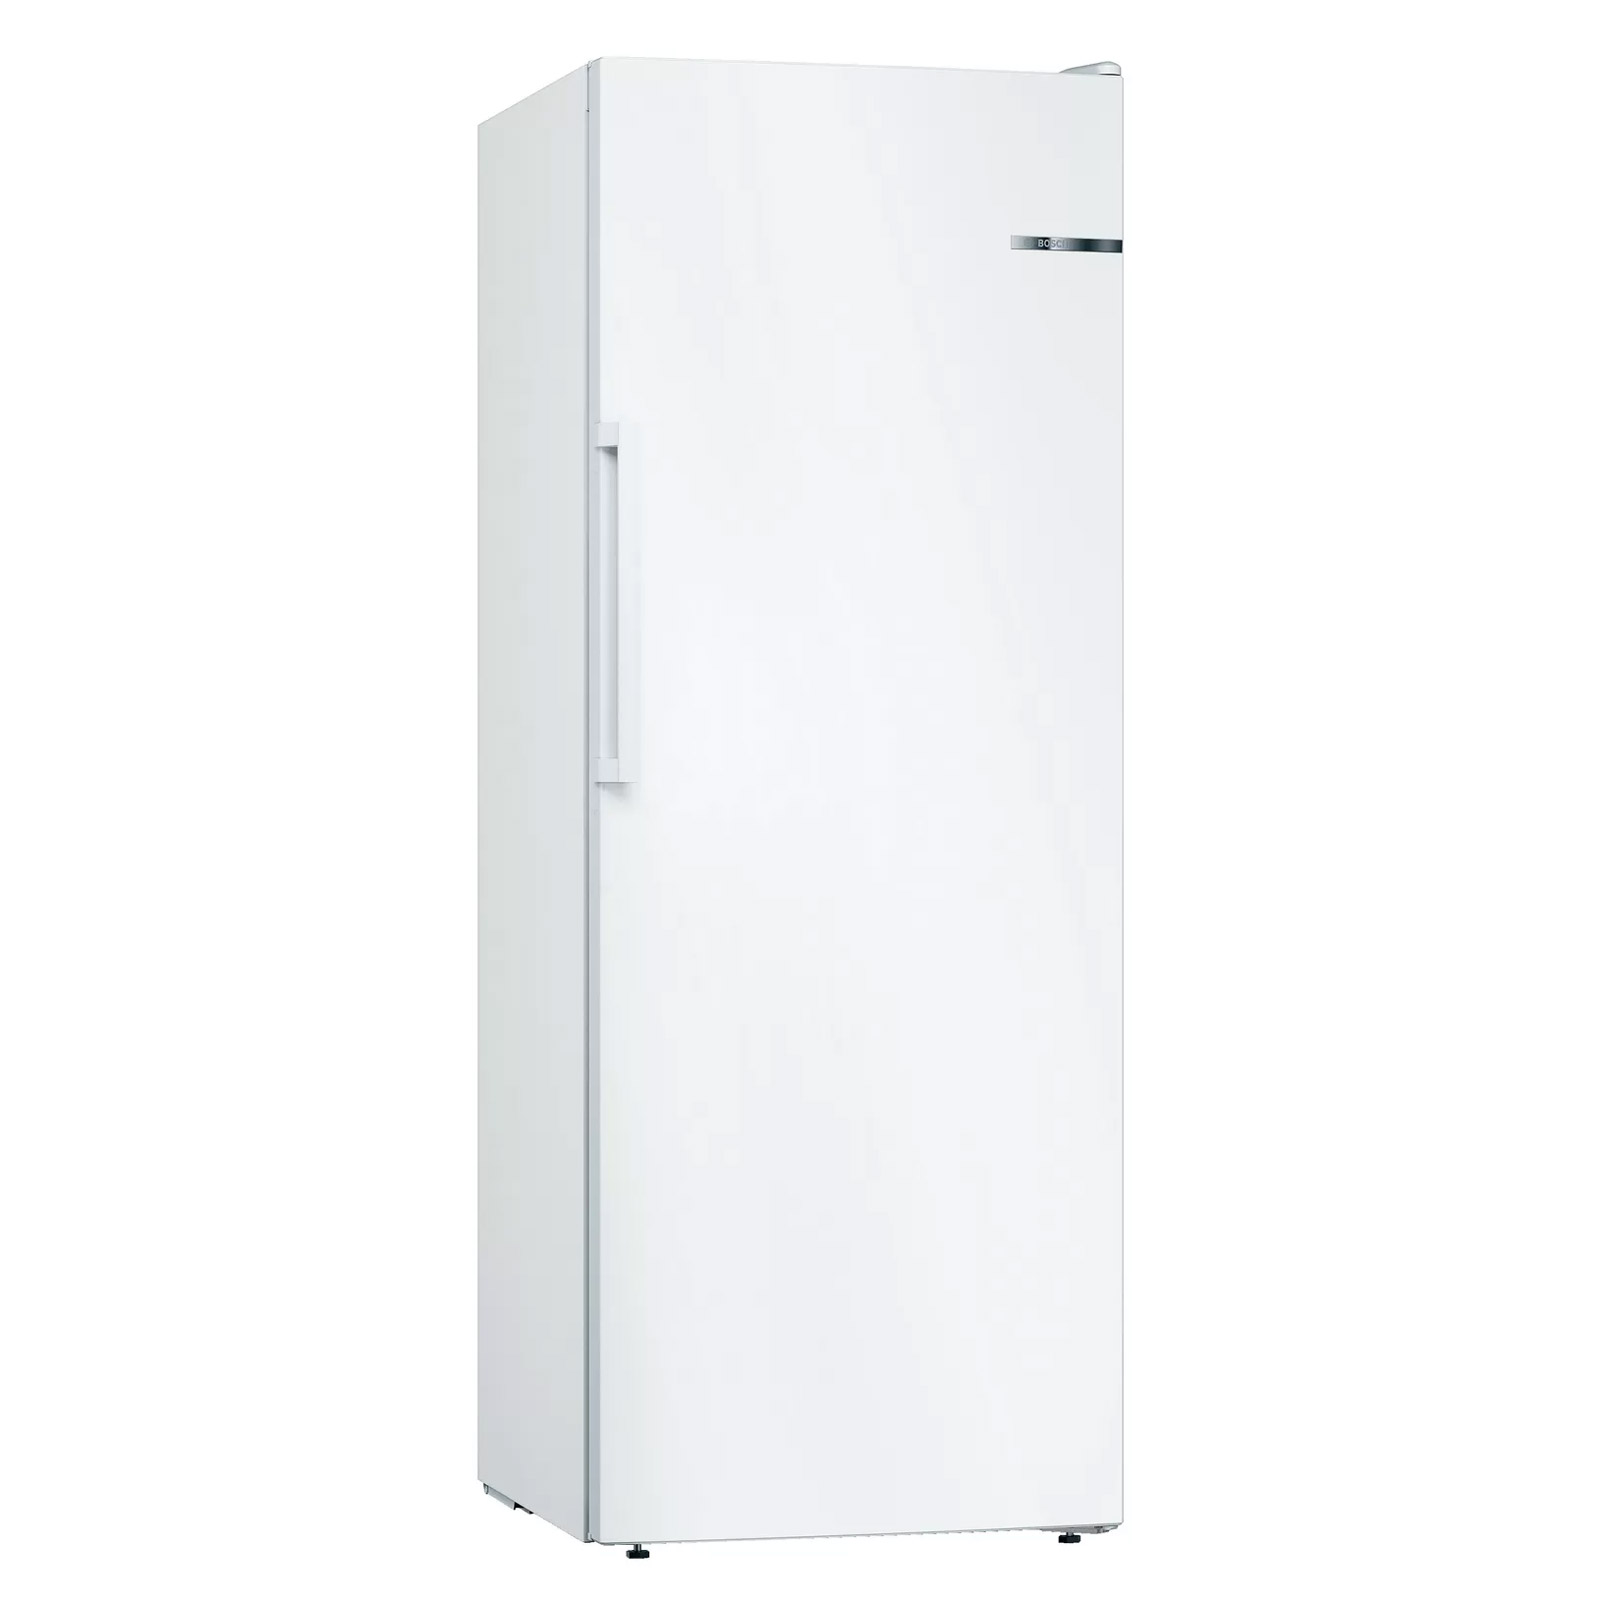 Image of Bosch GSN29VWEVG Series 4 60cm Tall Freezer in White 1 61m E Rated 200